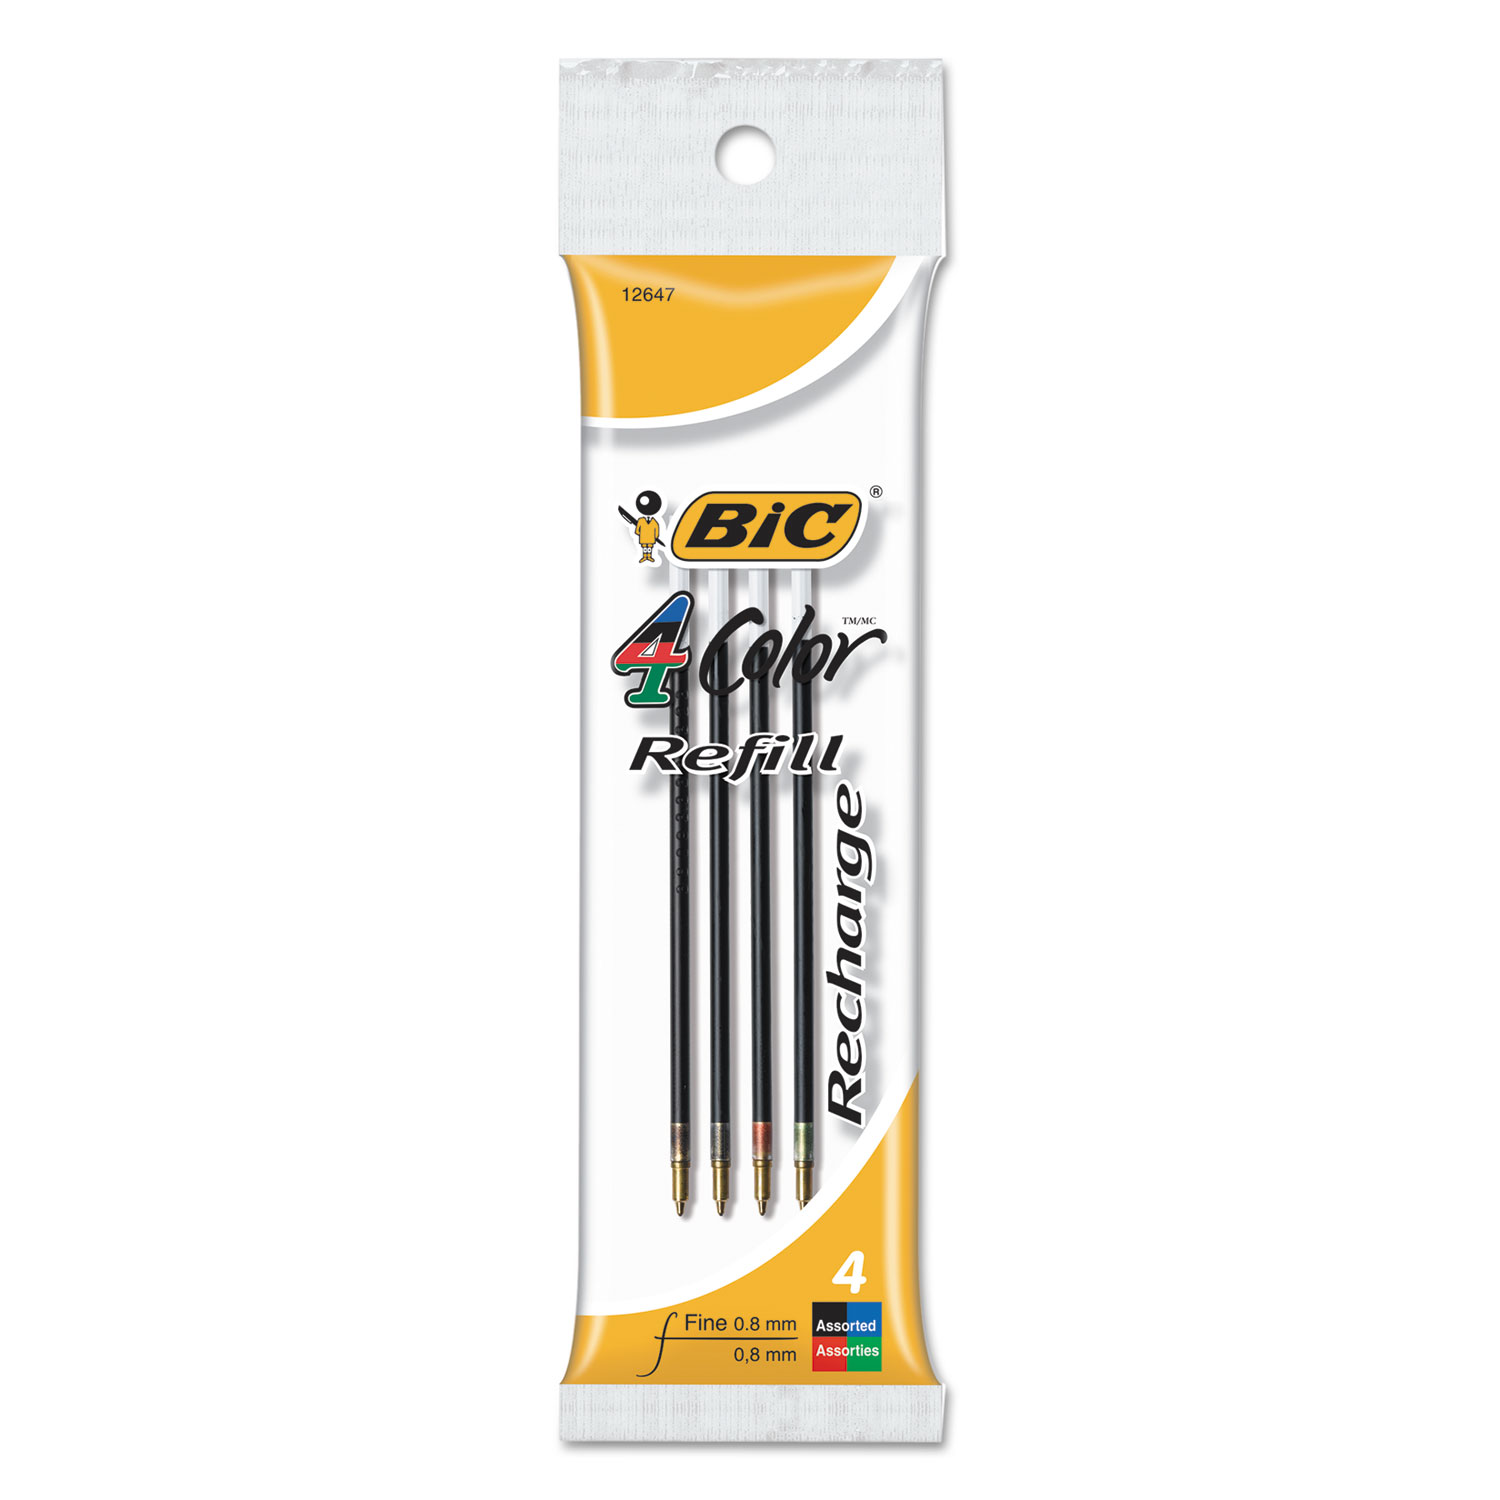  BIC FRM41 AST Refill for BIC 4-Color Retractable Ballpoint Pens, Fine Point, Assorted Ink Colors, 4/Pack (BICFRM41) 